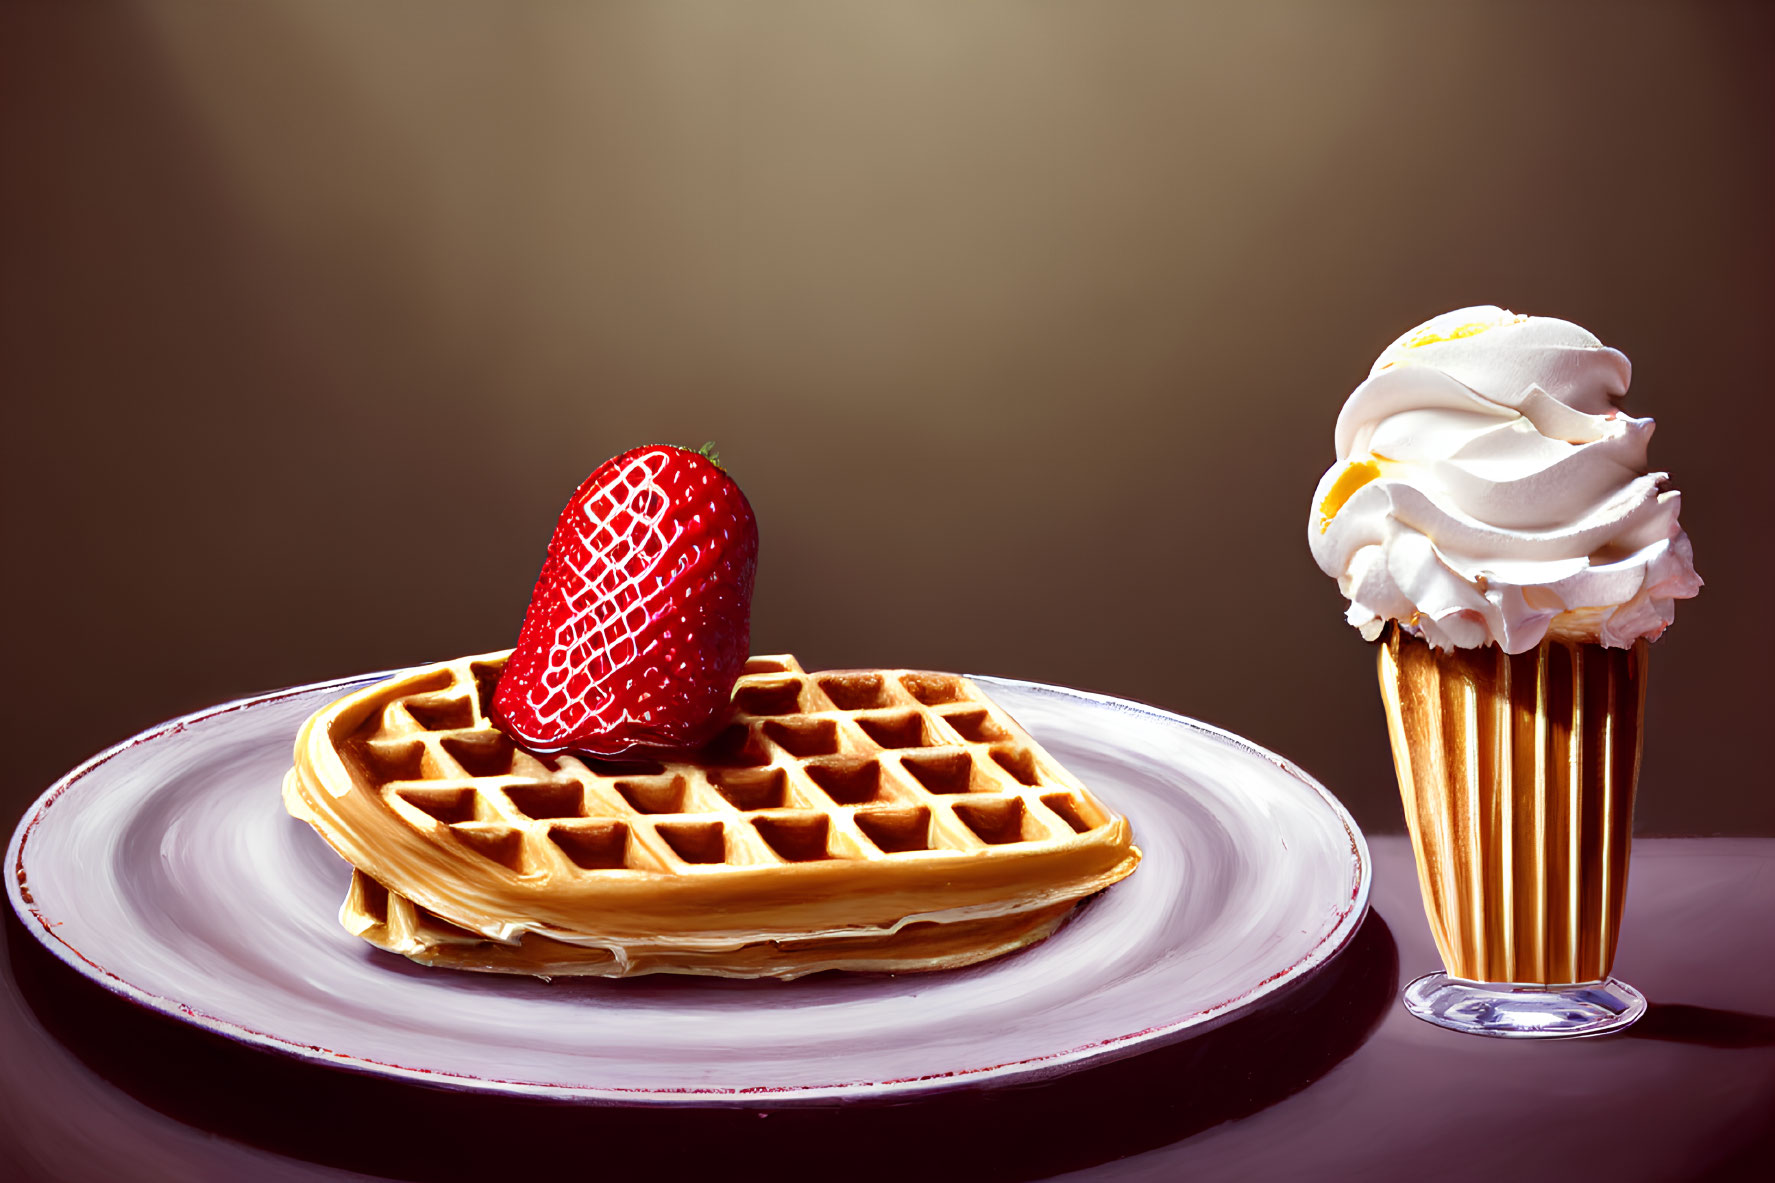 Golden waffle with ripe strawberry and whipped cream dessert on plate.